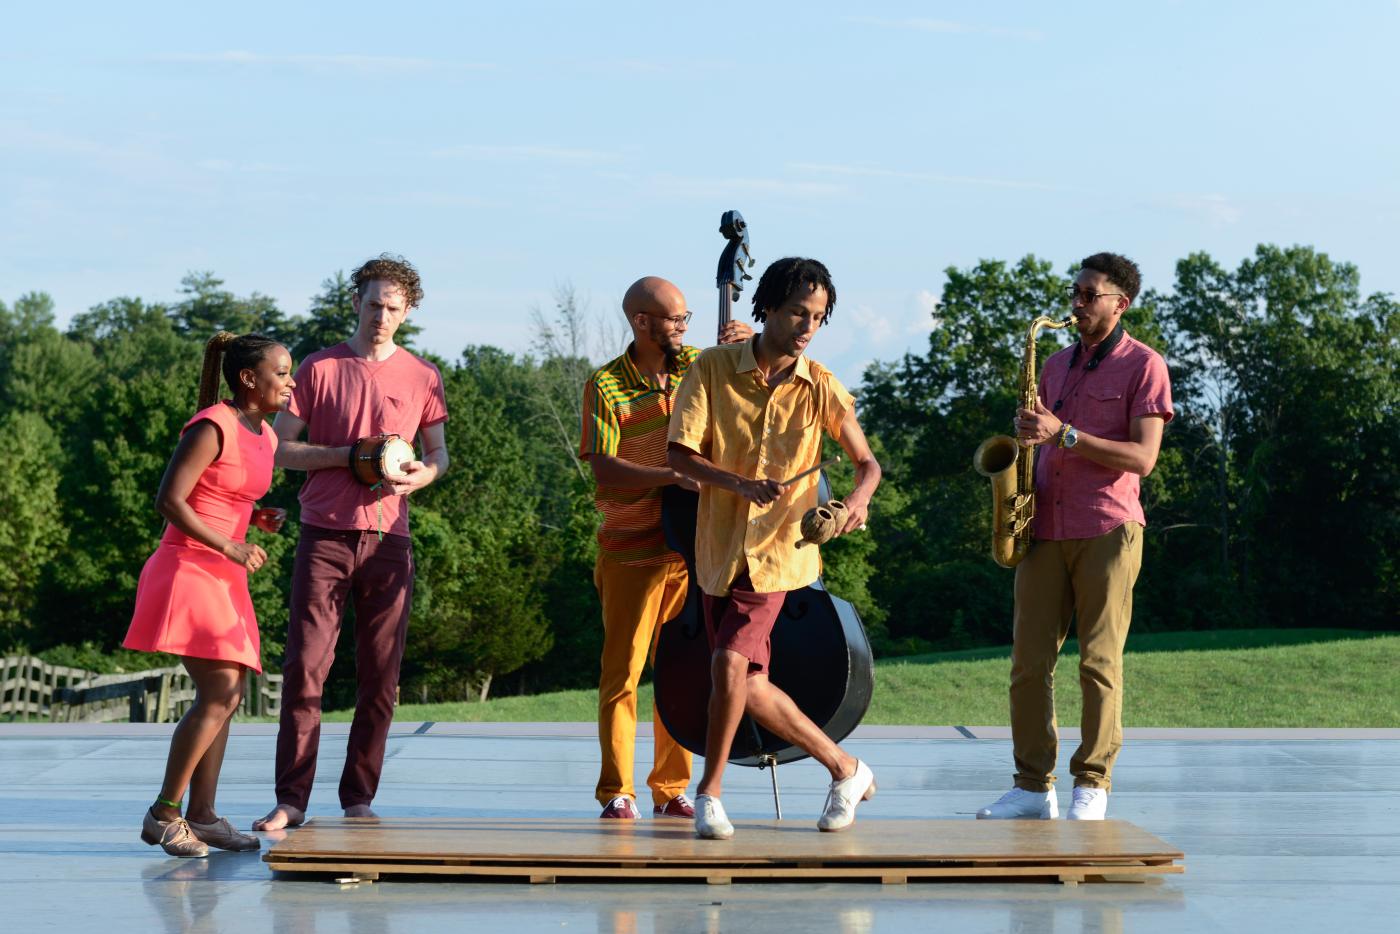 Outside and on a stage, four musicians perform while a dancer steps in front of them.